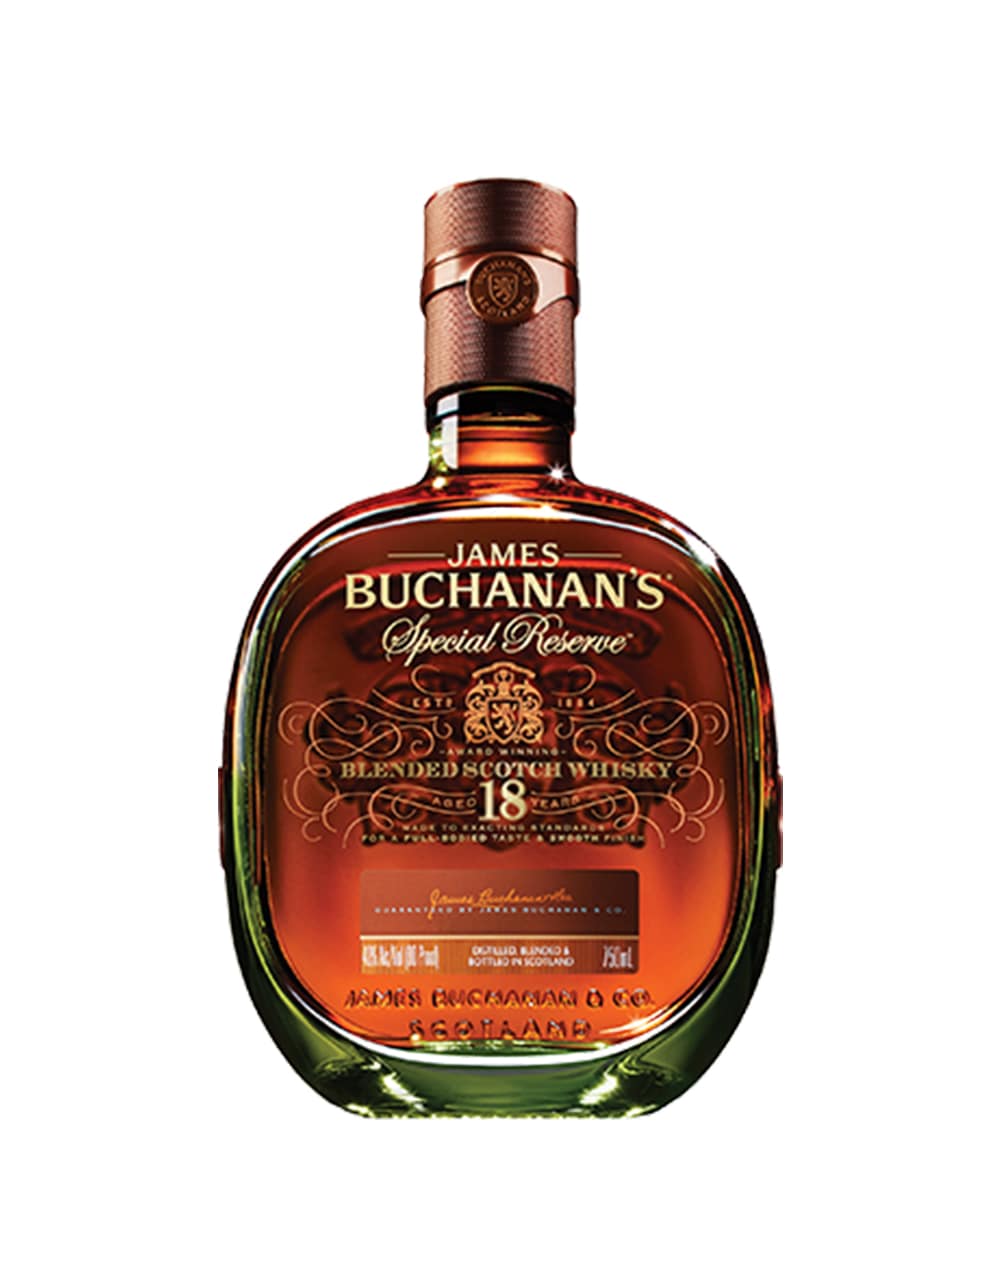 Buchanans 18 Year Old Special Reserve Scotch Whisky